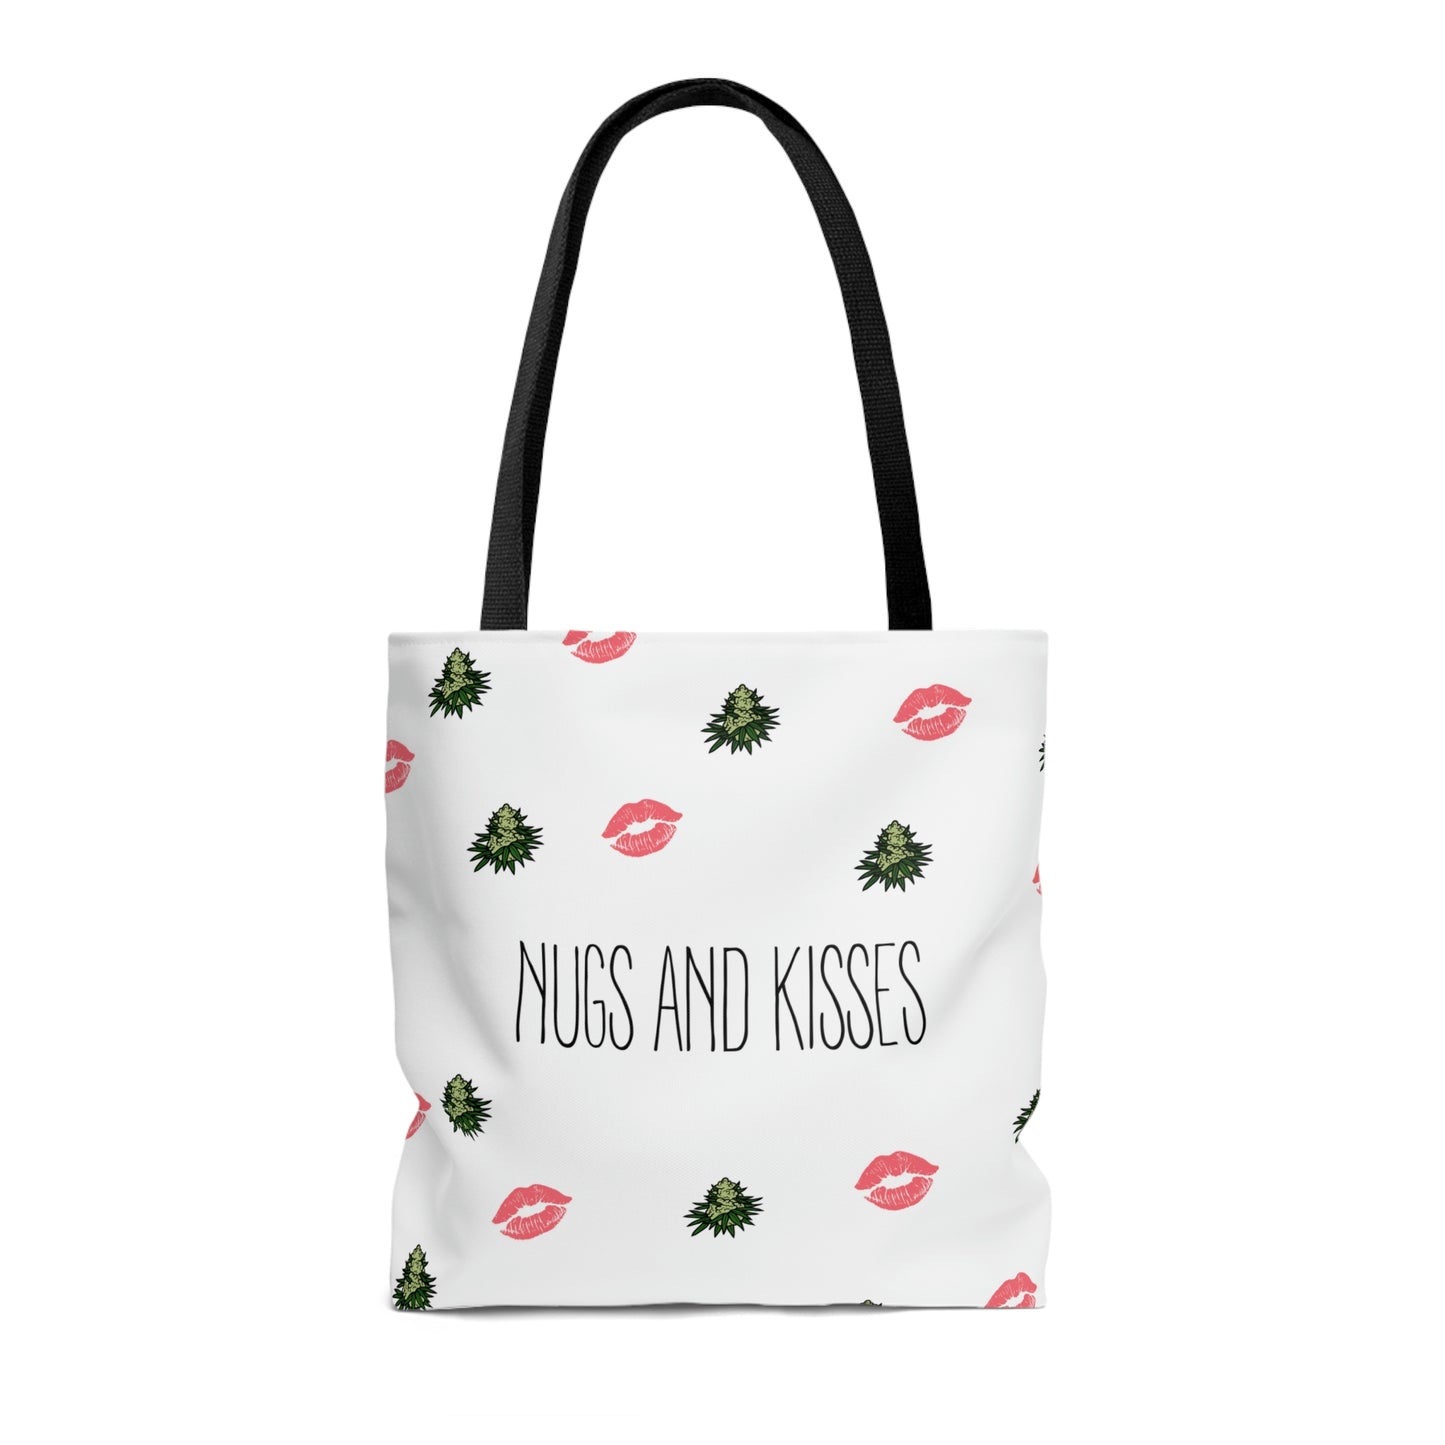 A white with black hand straps Nugs and Kisses Weed Tote Bag